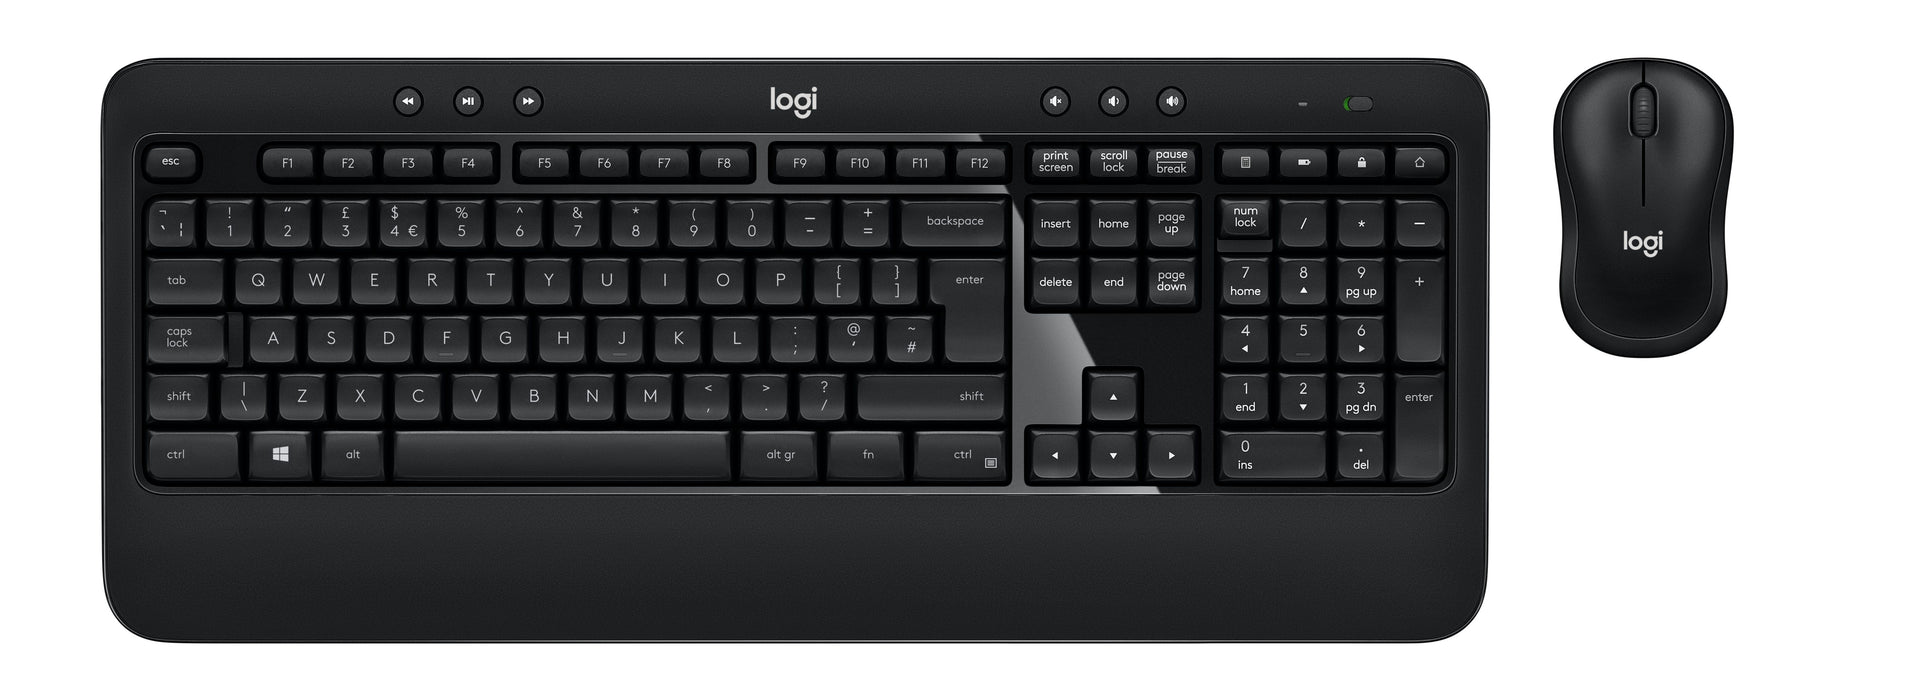 Logitech ADVANCED Combo Wireless Keyboard and Mouse, Full-size (100%), USB, QWERTY, Black, Mouse included